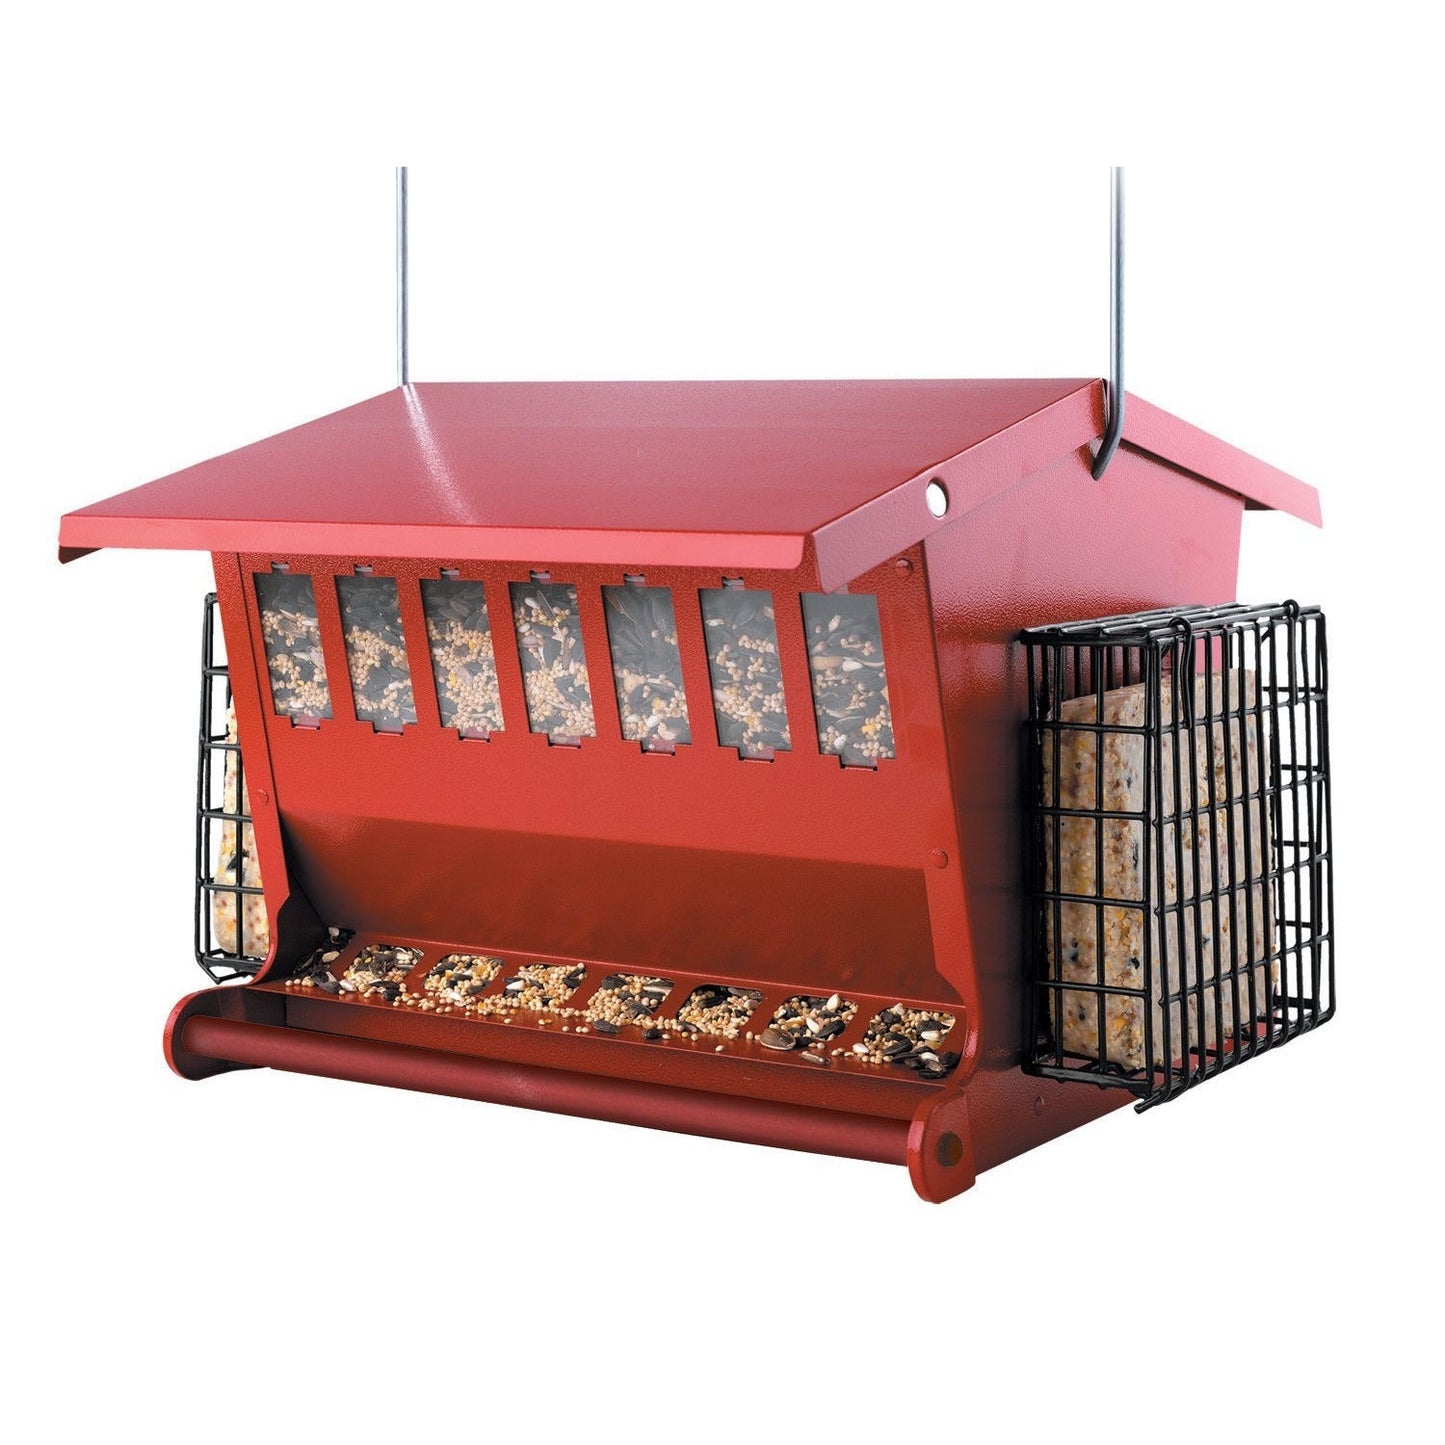 Red Metal House Shaped Bird Feeder with Heavy Duty Hanger